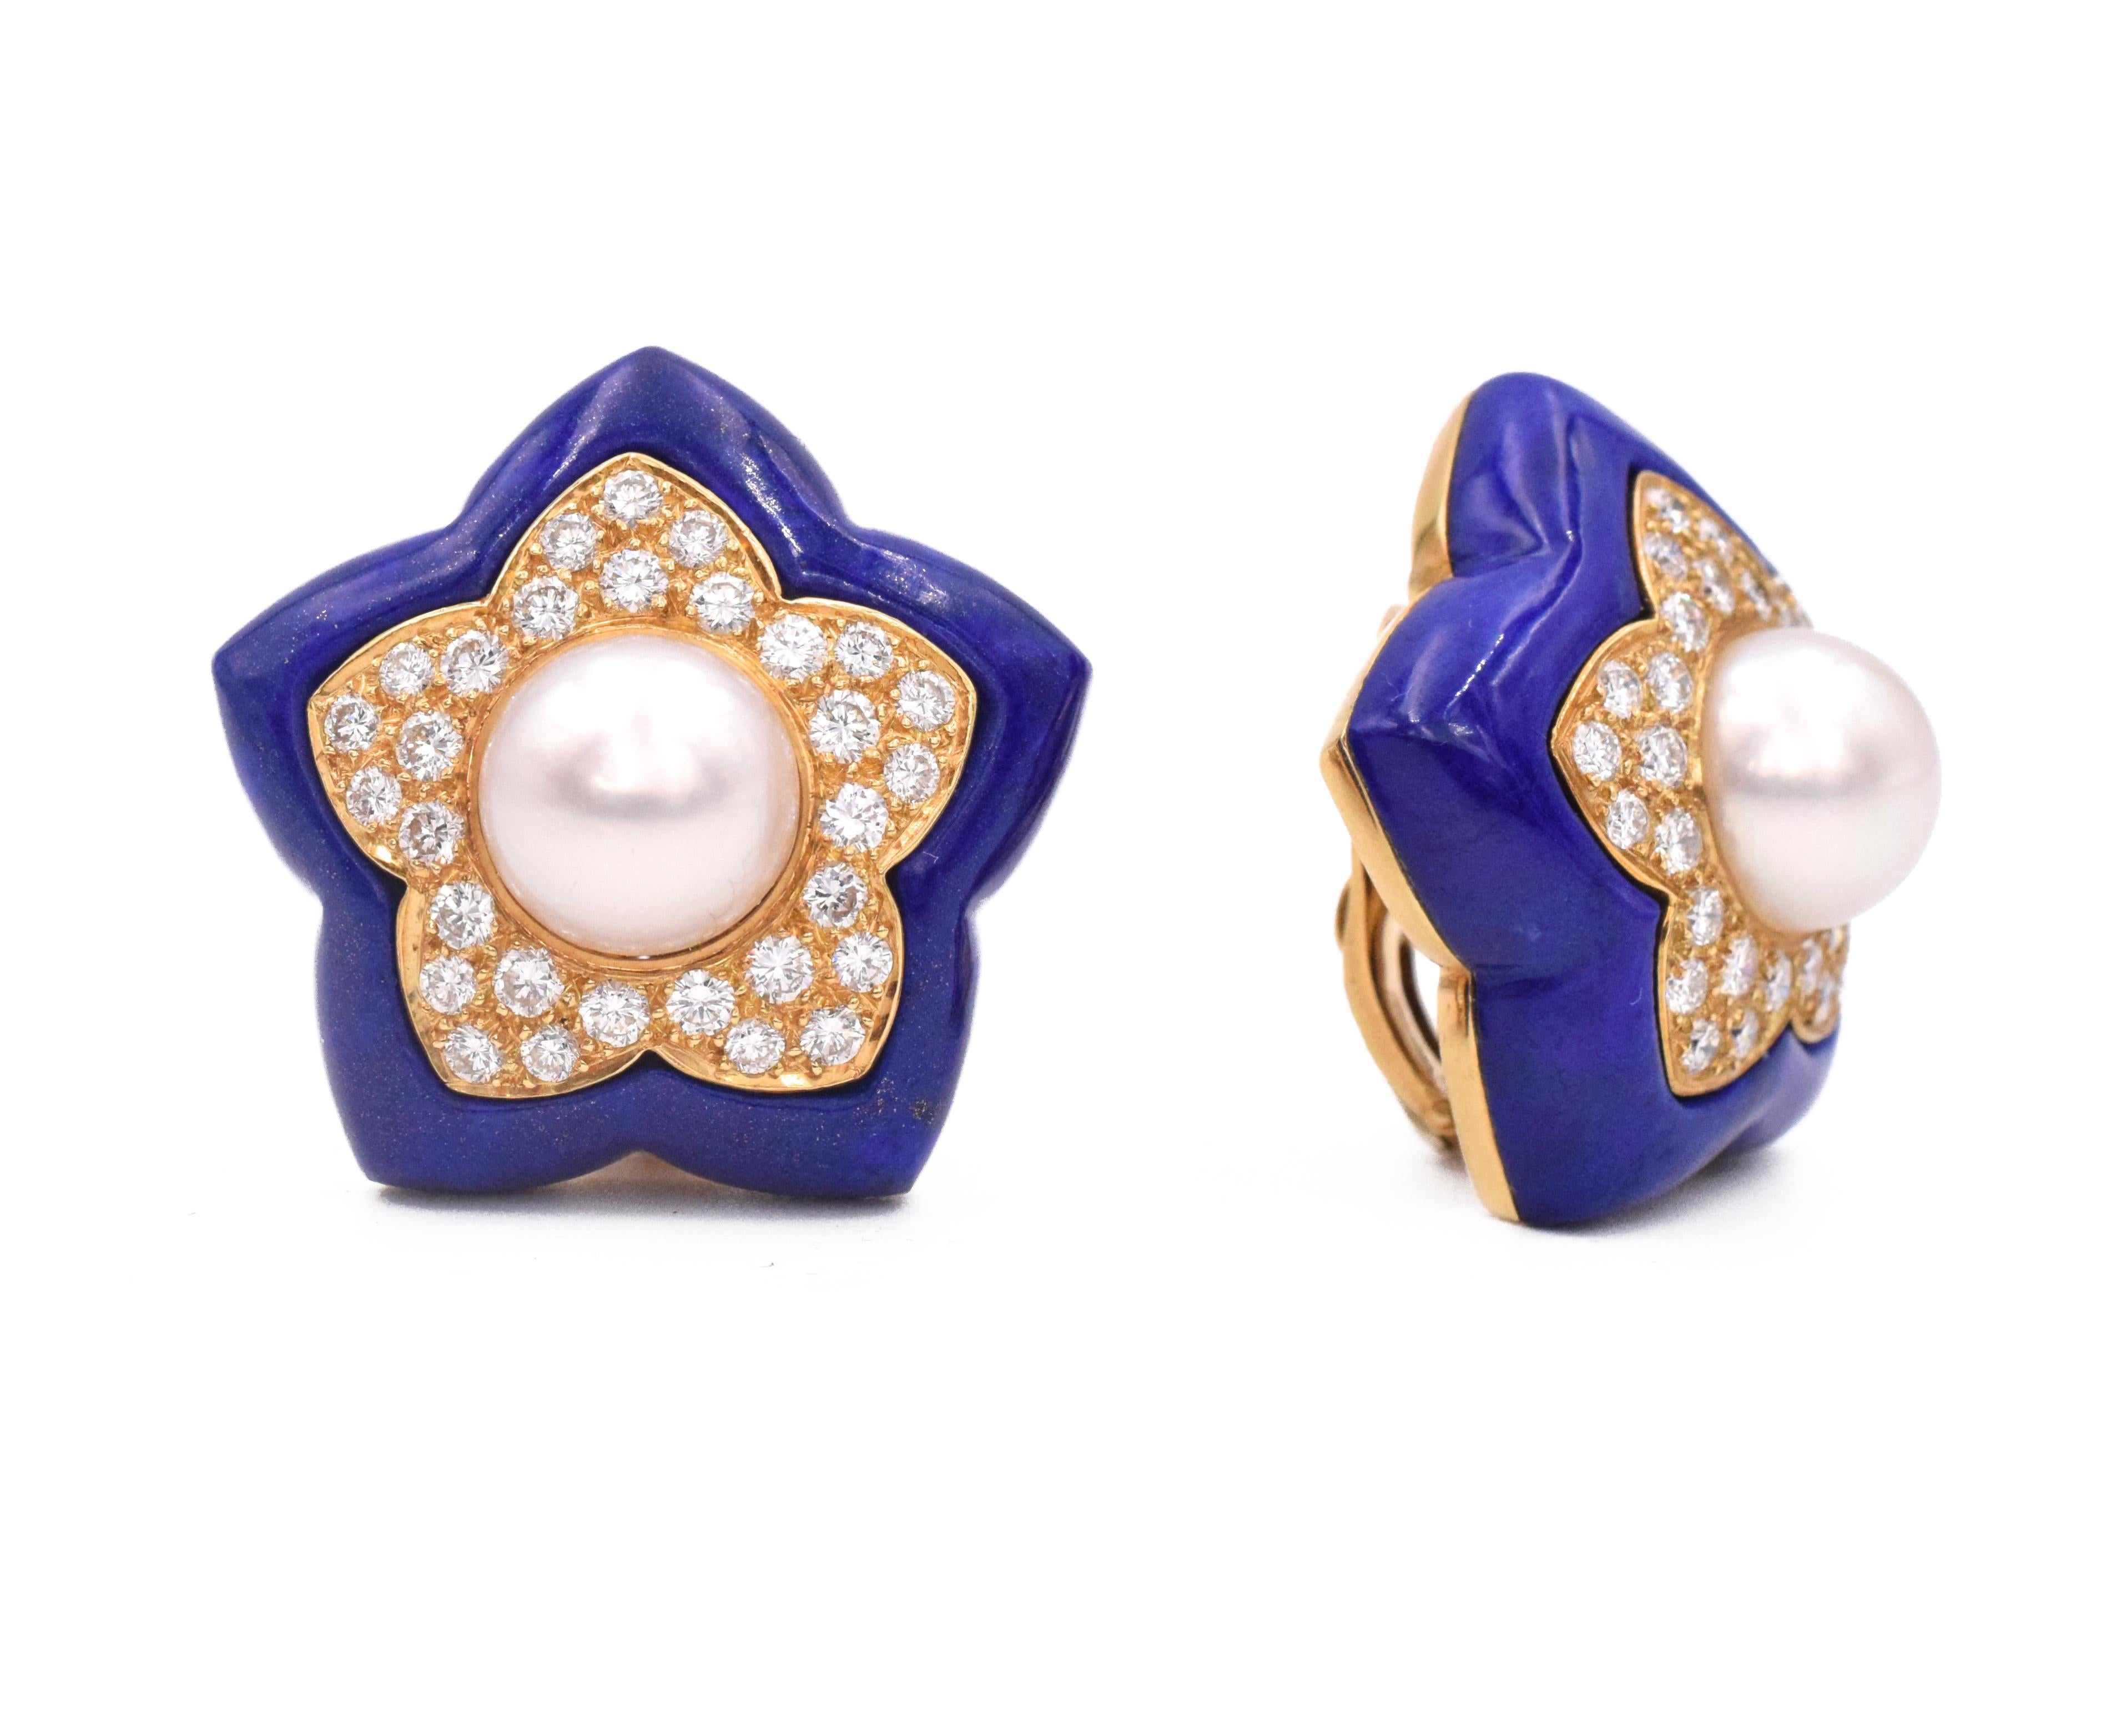 Van Cleef & Arpels pearl, diamond and lapis star earclip earrings in 18k yellow gold. The center of the earrings set with 9.5mm round white cultured pearl, surrounded by a gold star shape plate pave set with approximately 2ct of round brilliant cut